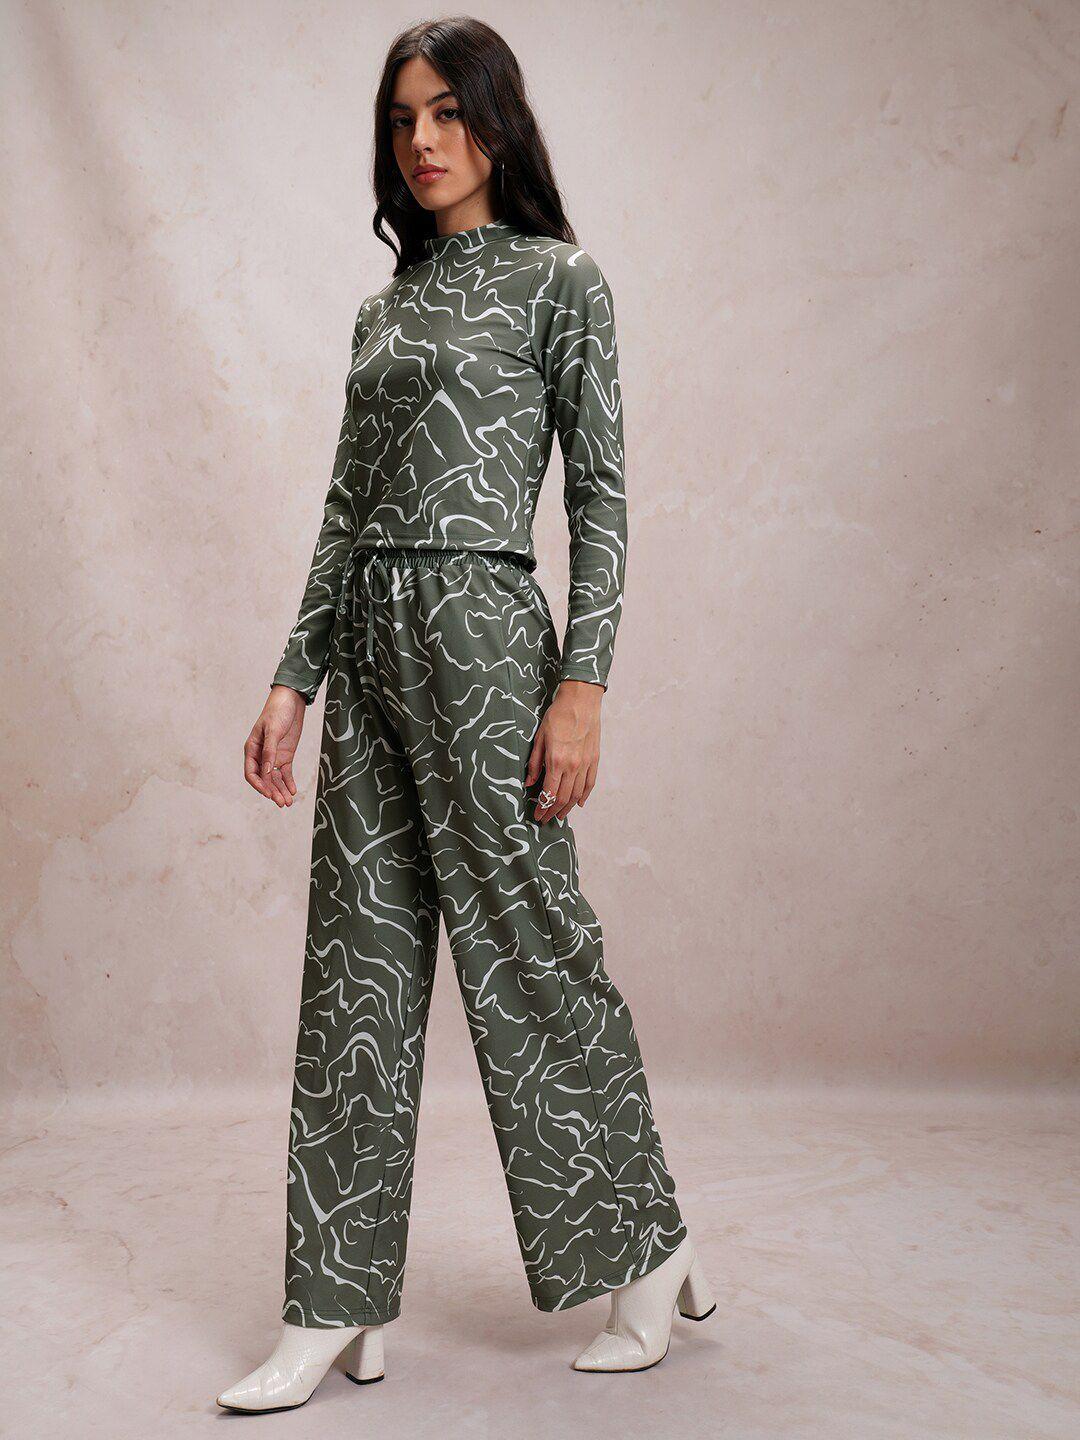 tokyo talkies printed high neck top with trousers co-ords